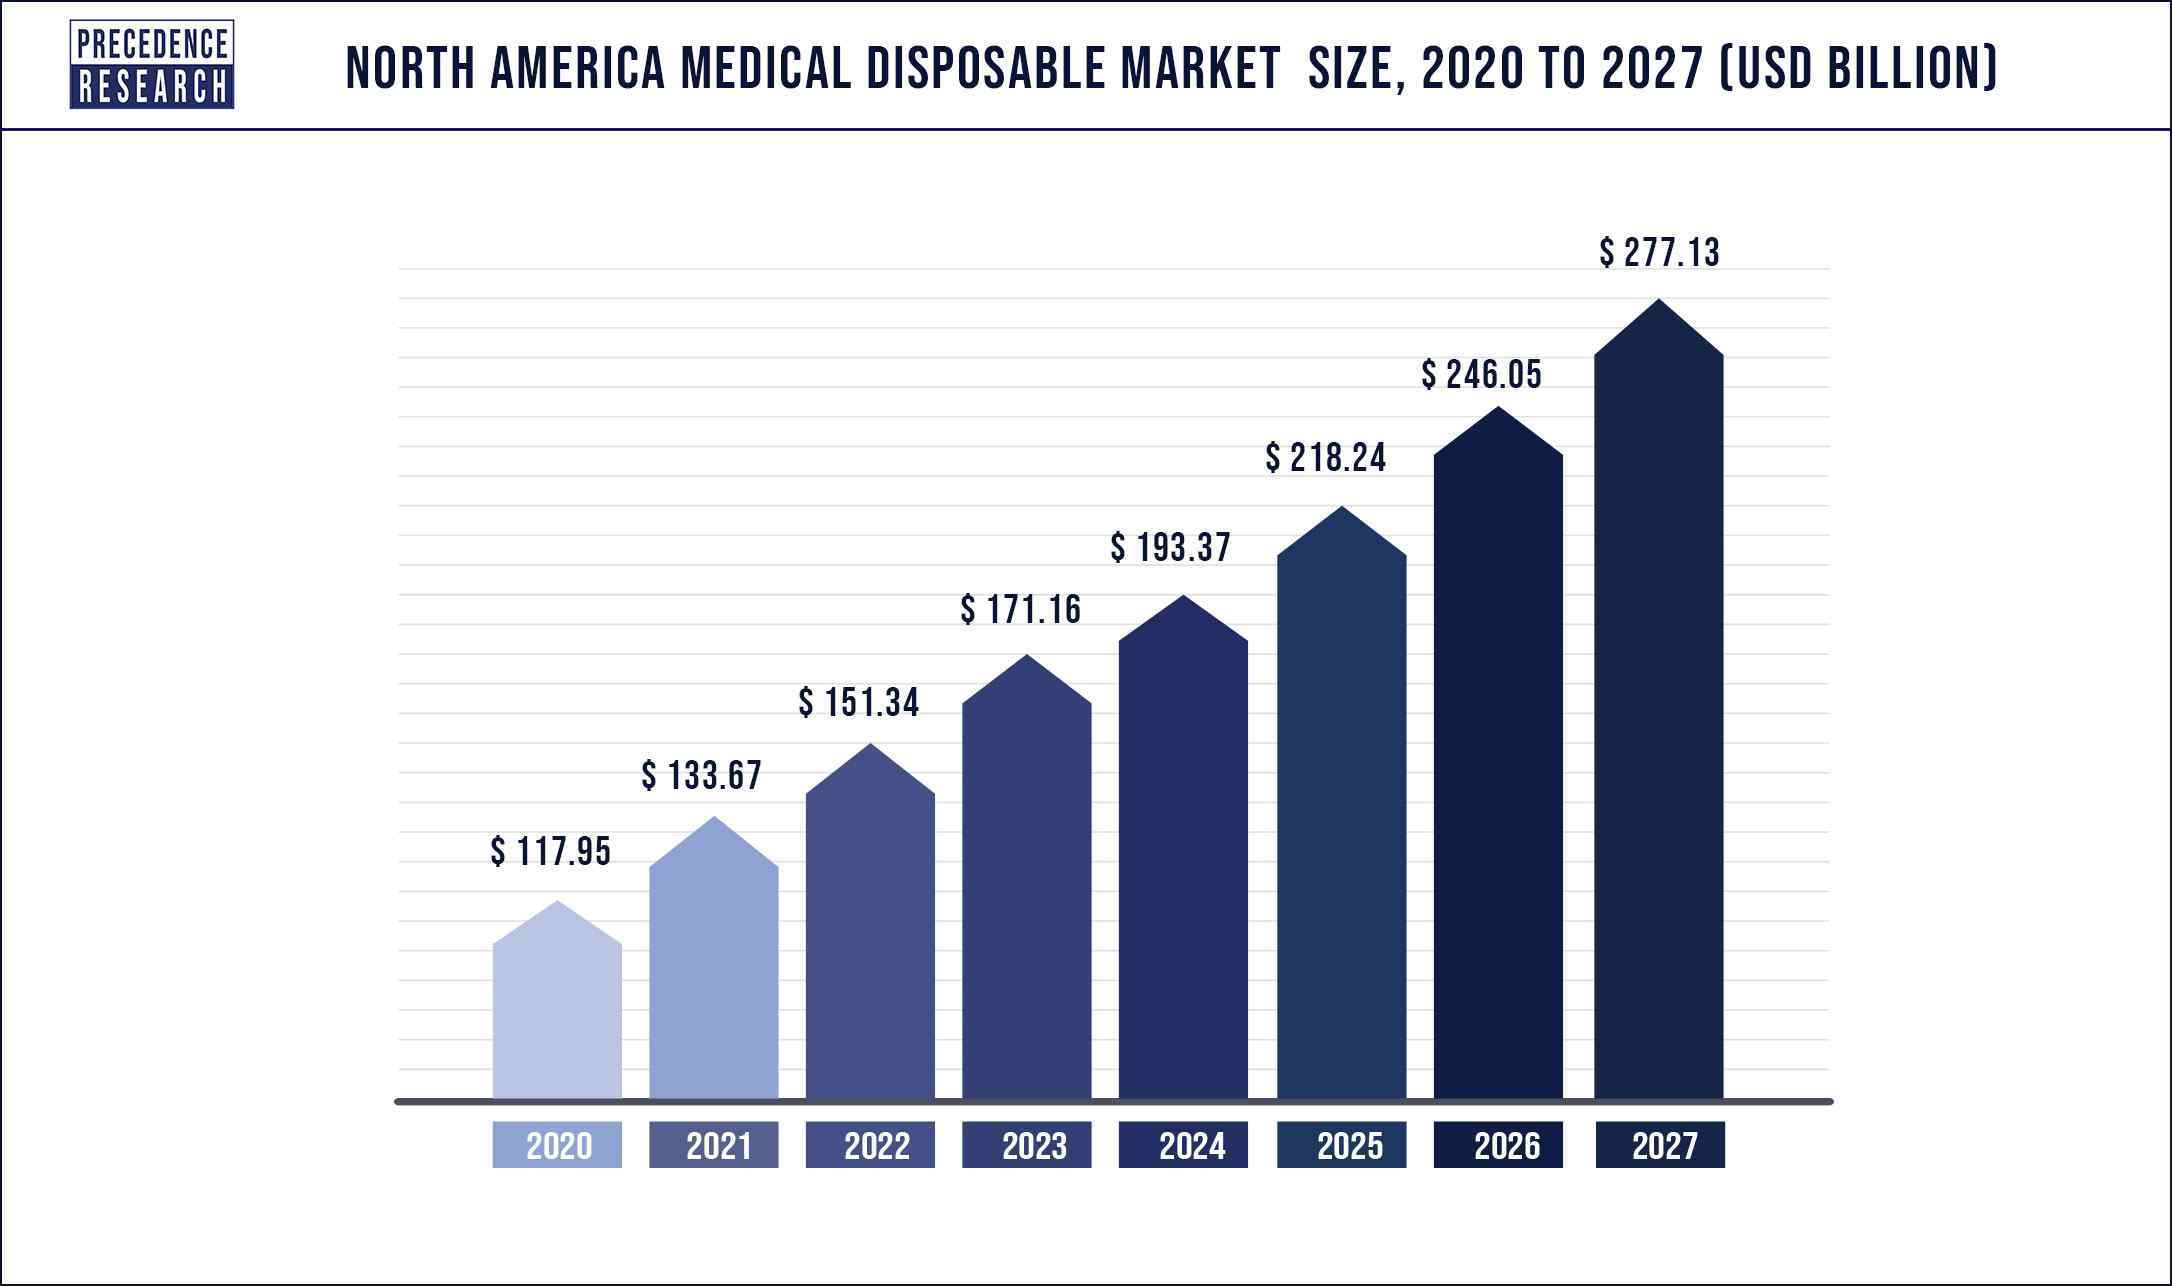 North America Medical Disposables Market Size 2020 to 2027